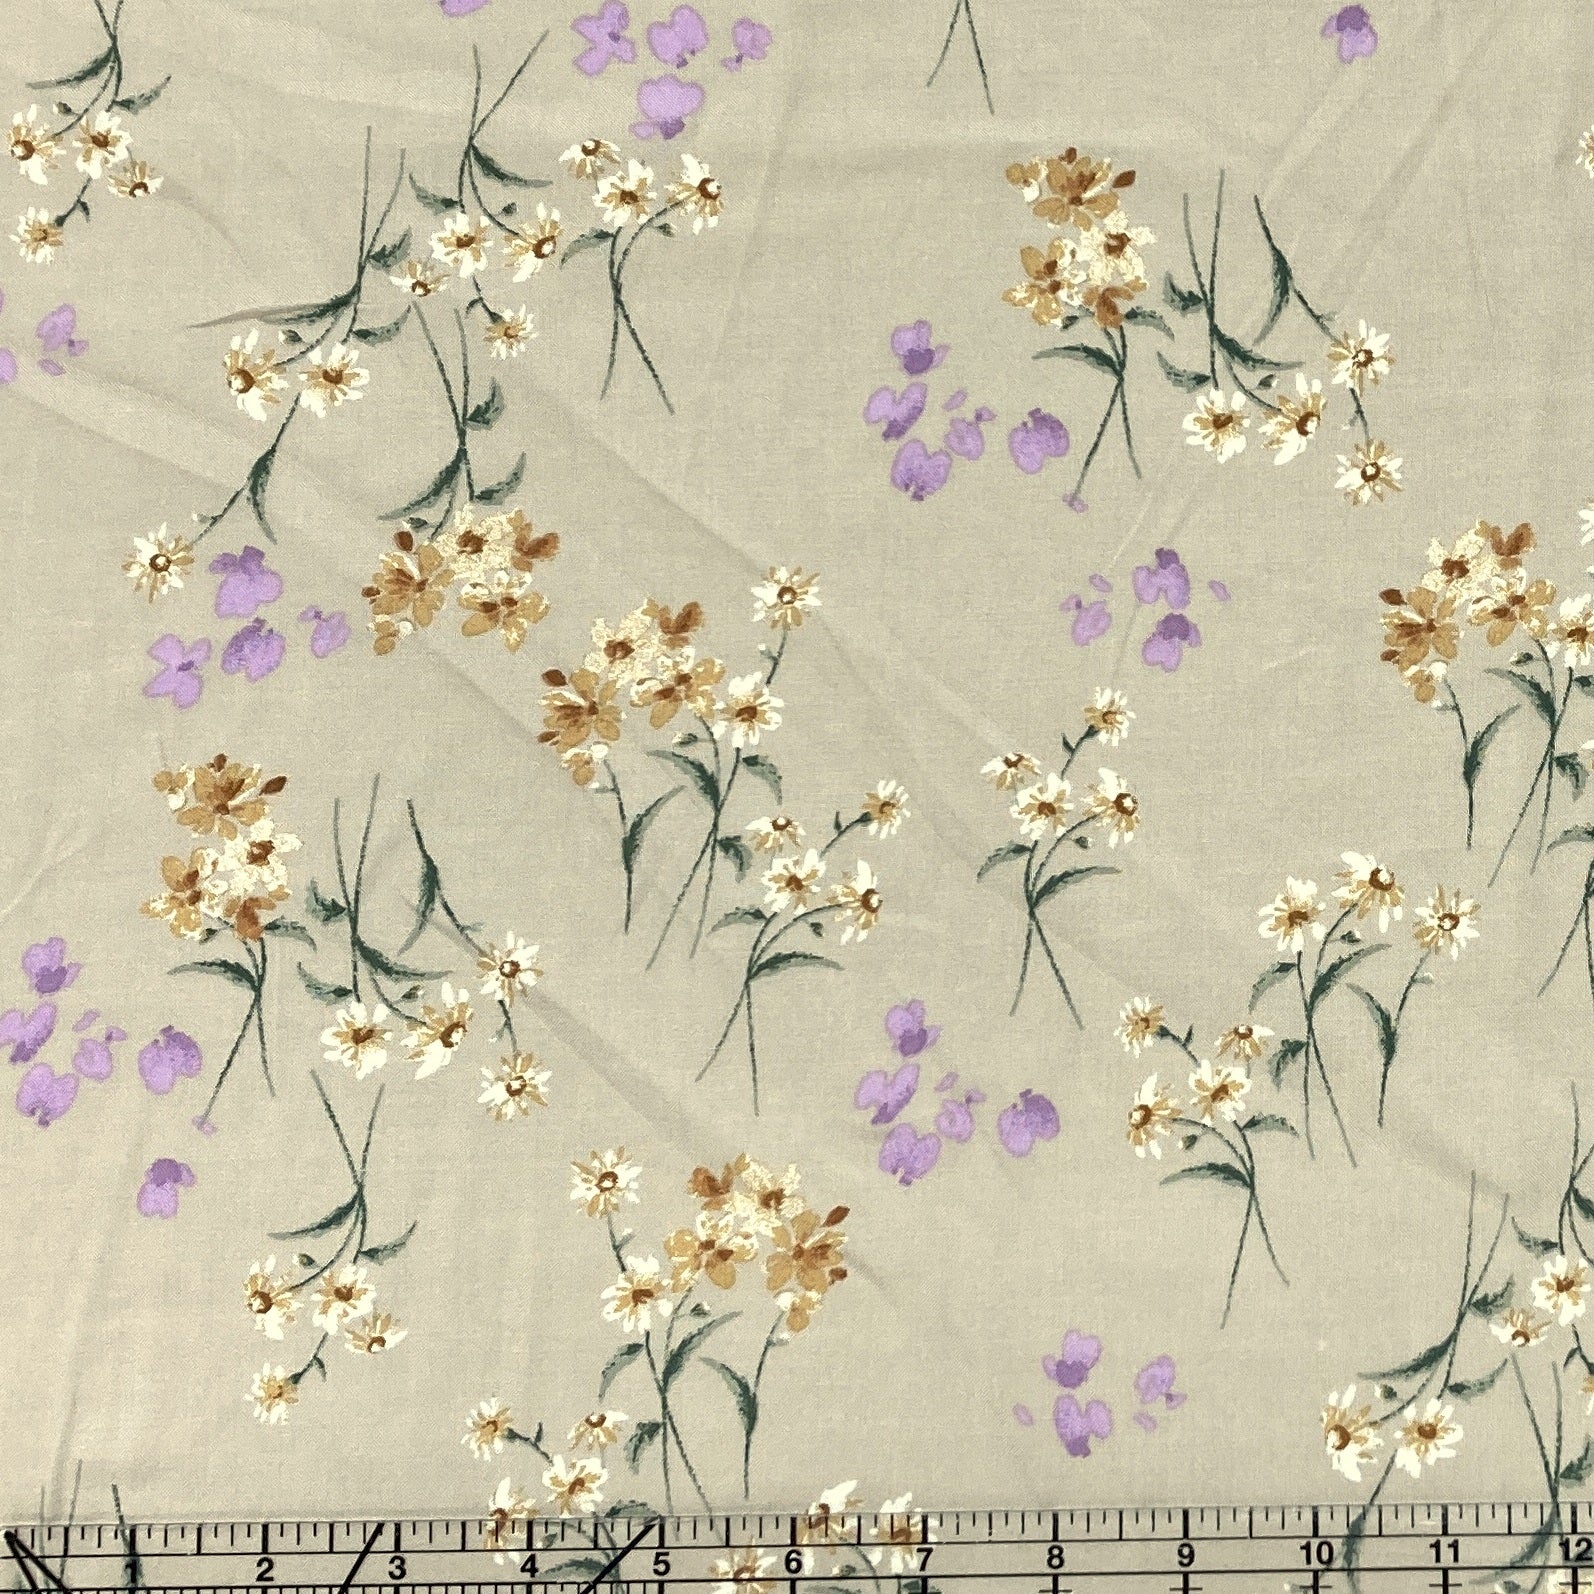 Light Brown Lilac and Green Daisy Floral Rayon Challis